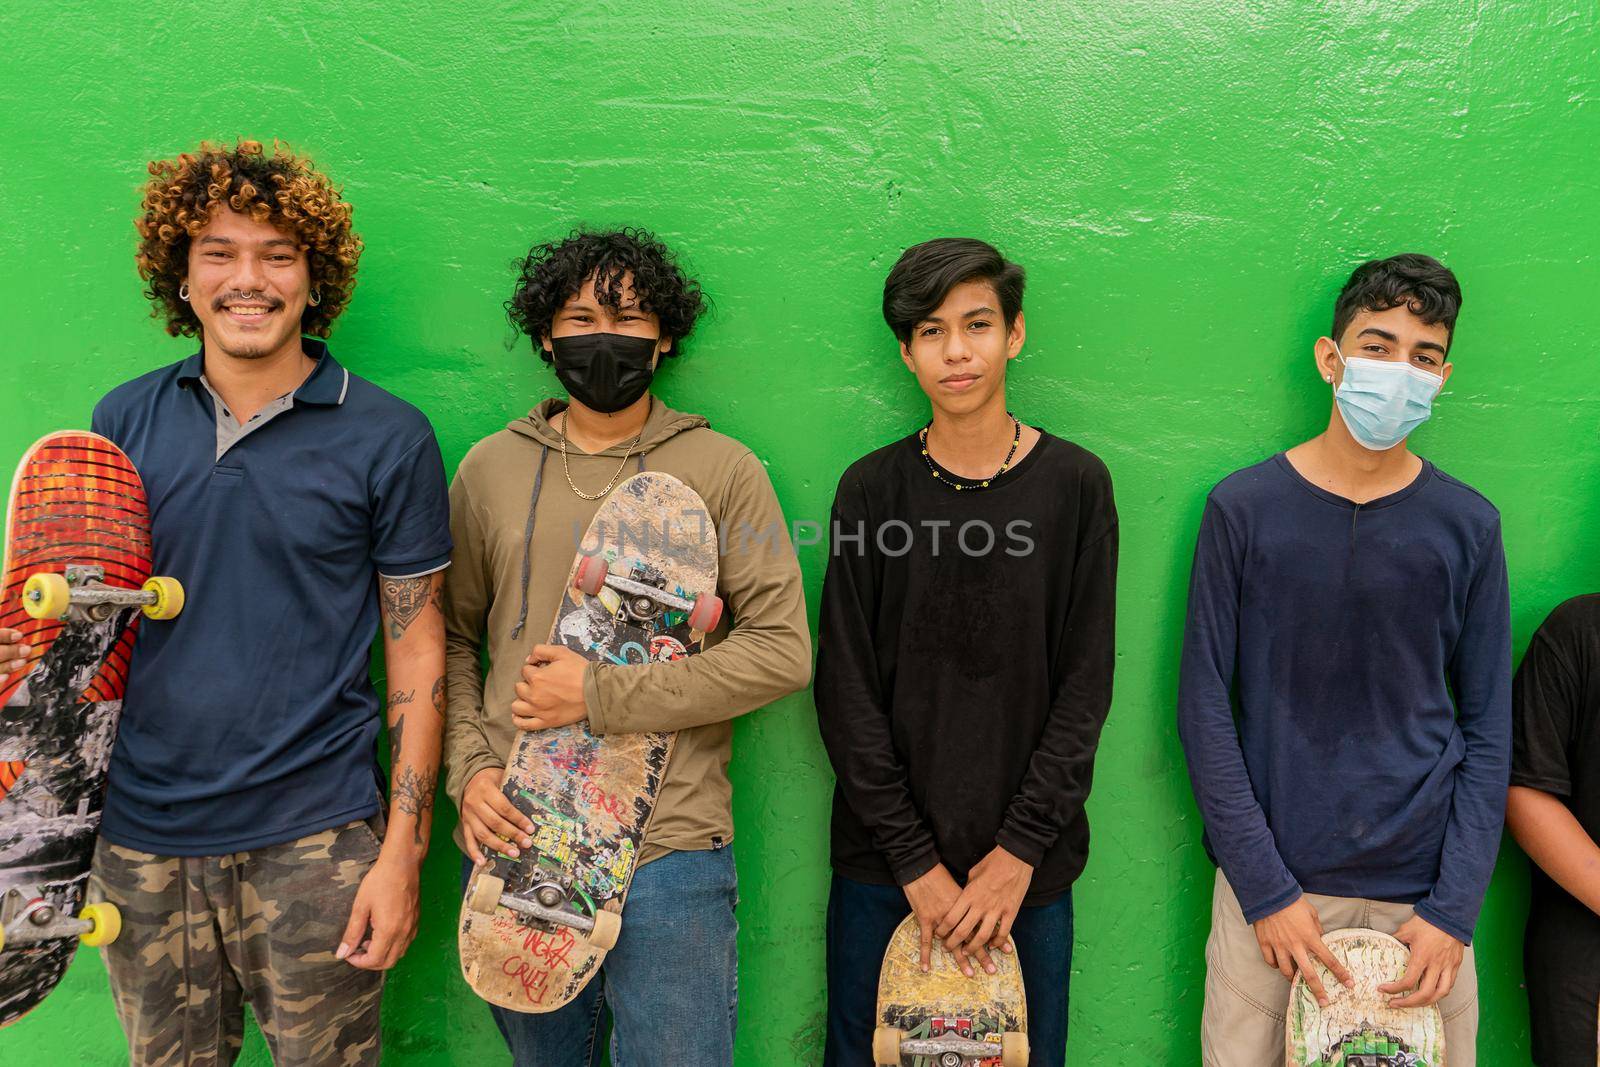 Latino teenagers leaning against a wall and looking at the camera smiling with their skate boards in their hands in Managua Nicaragua